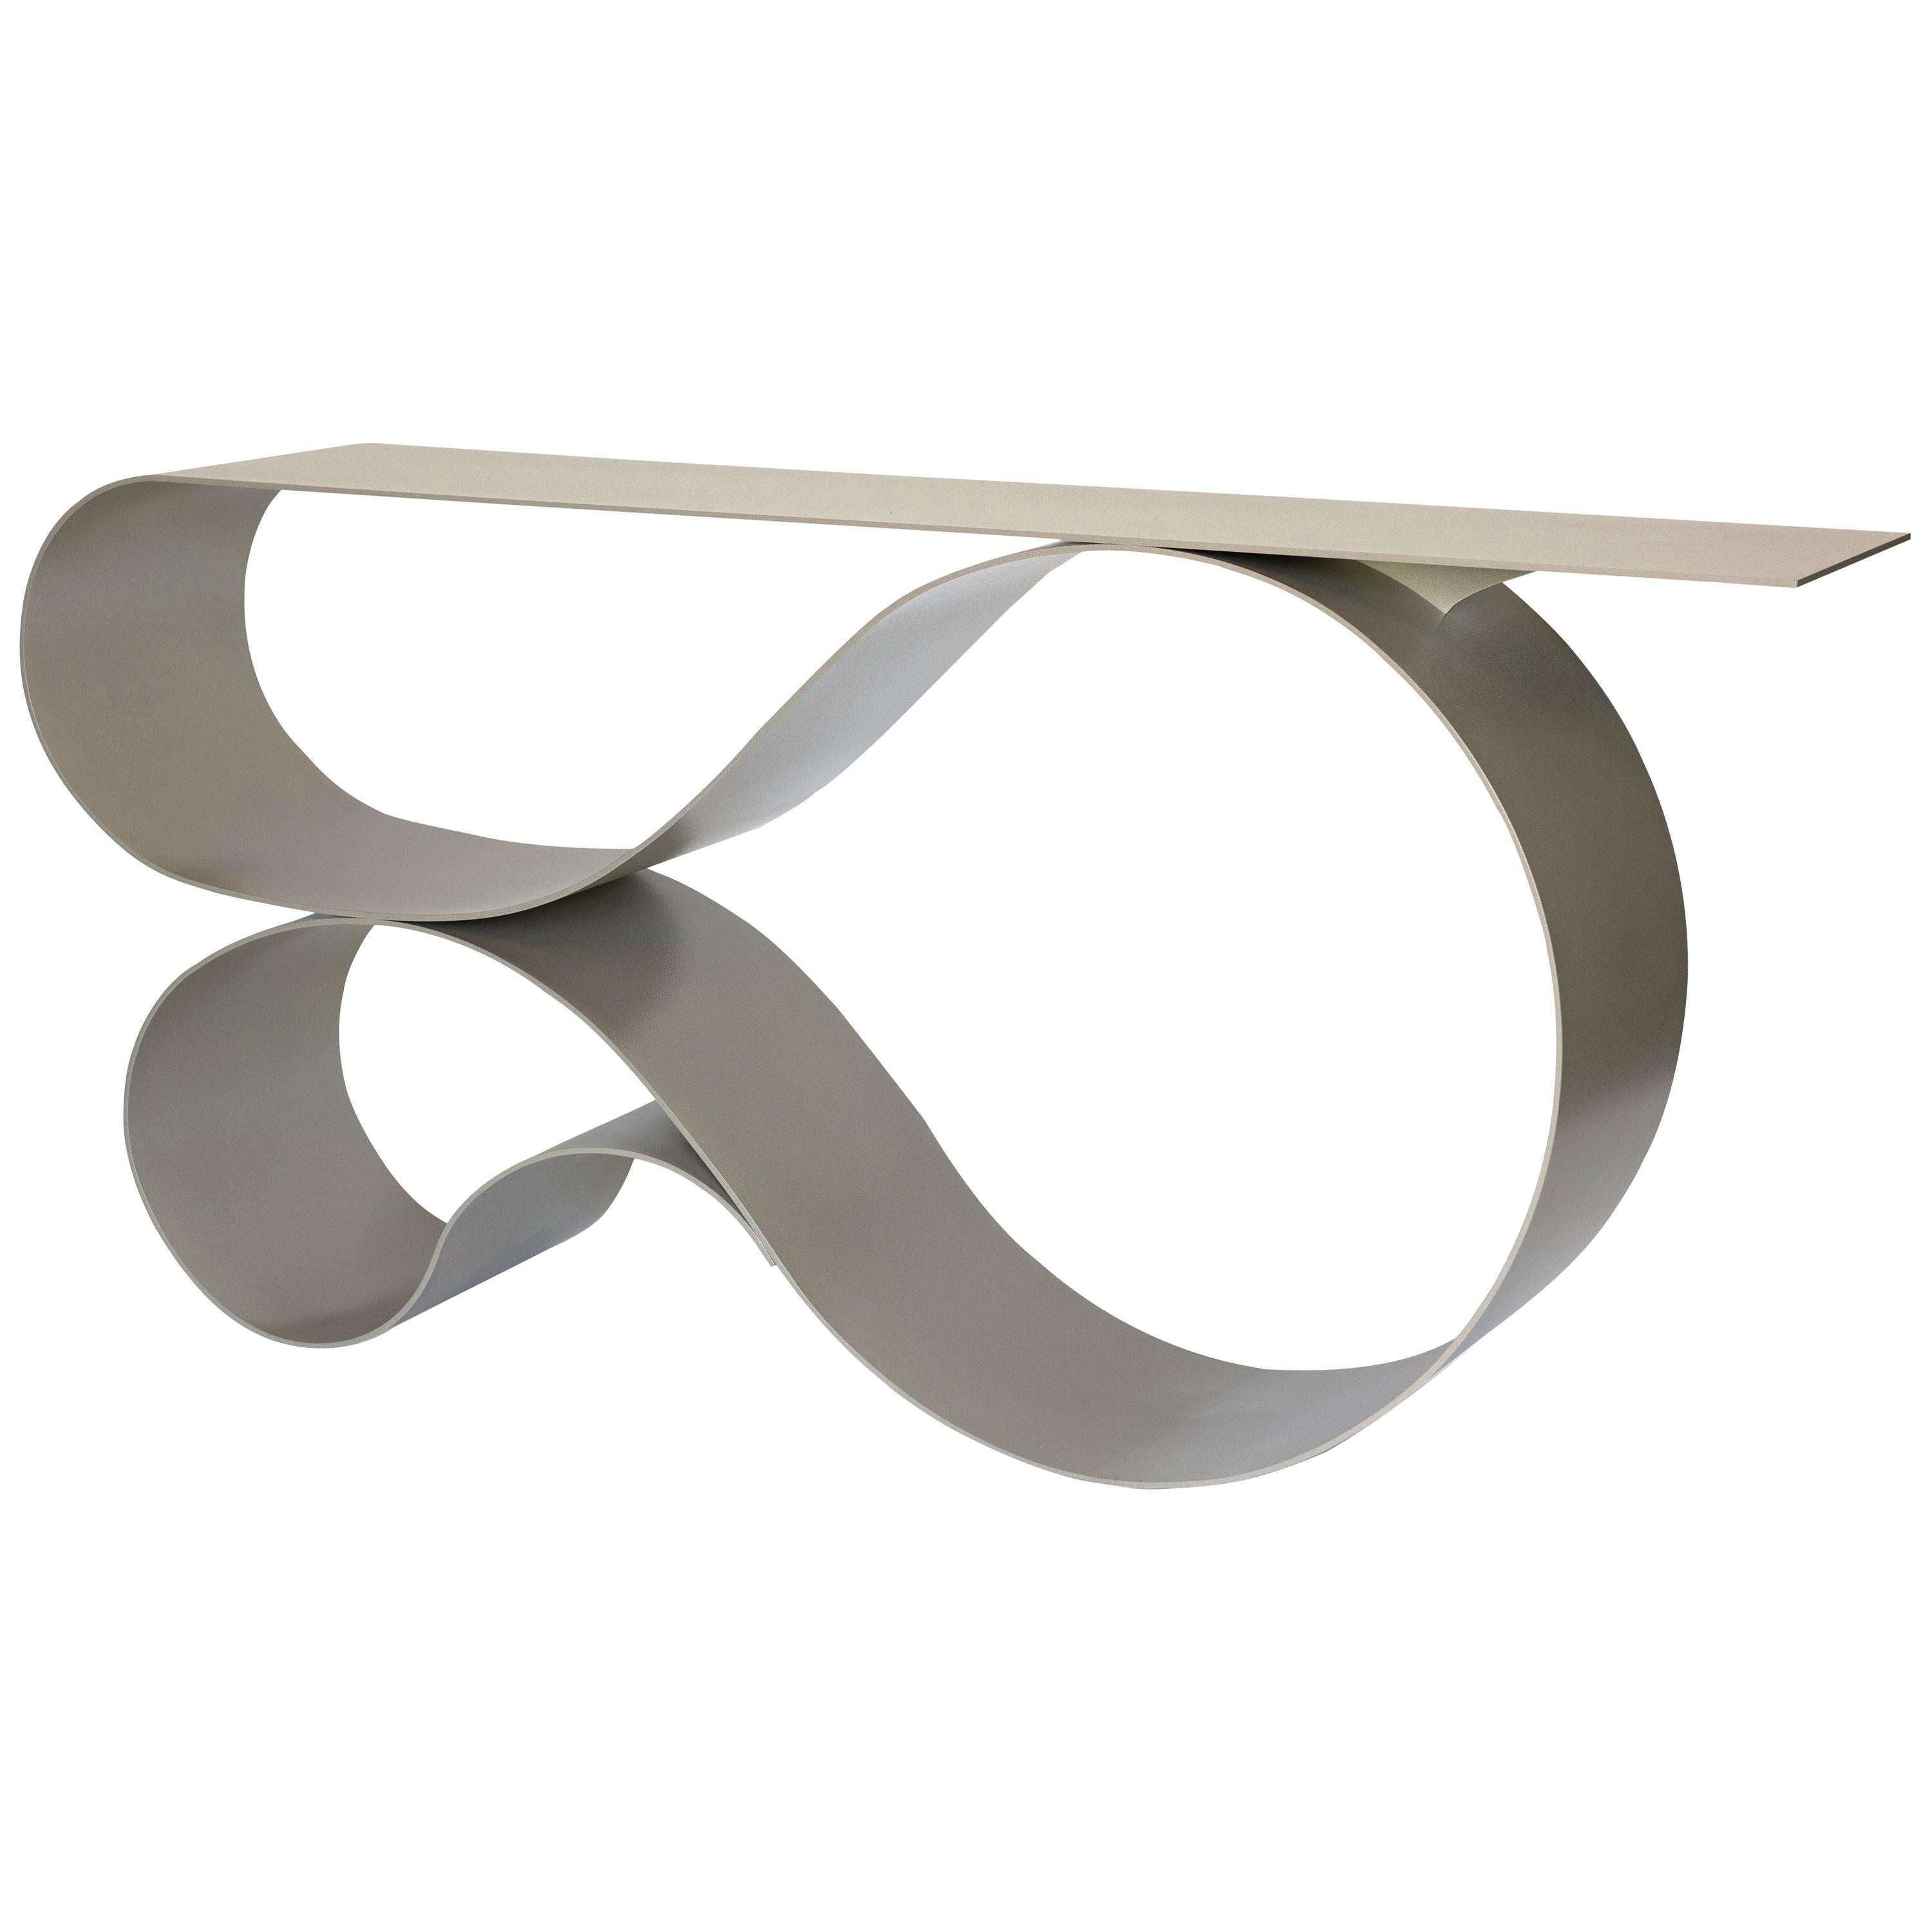 Whorl Console, in Beige Powder Coated Aluminum by Neal Aronowitz